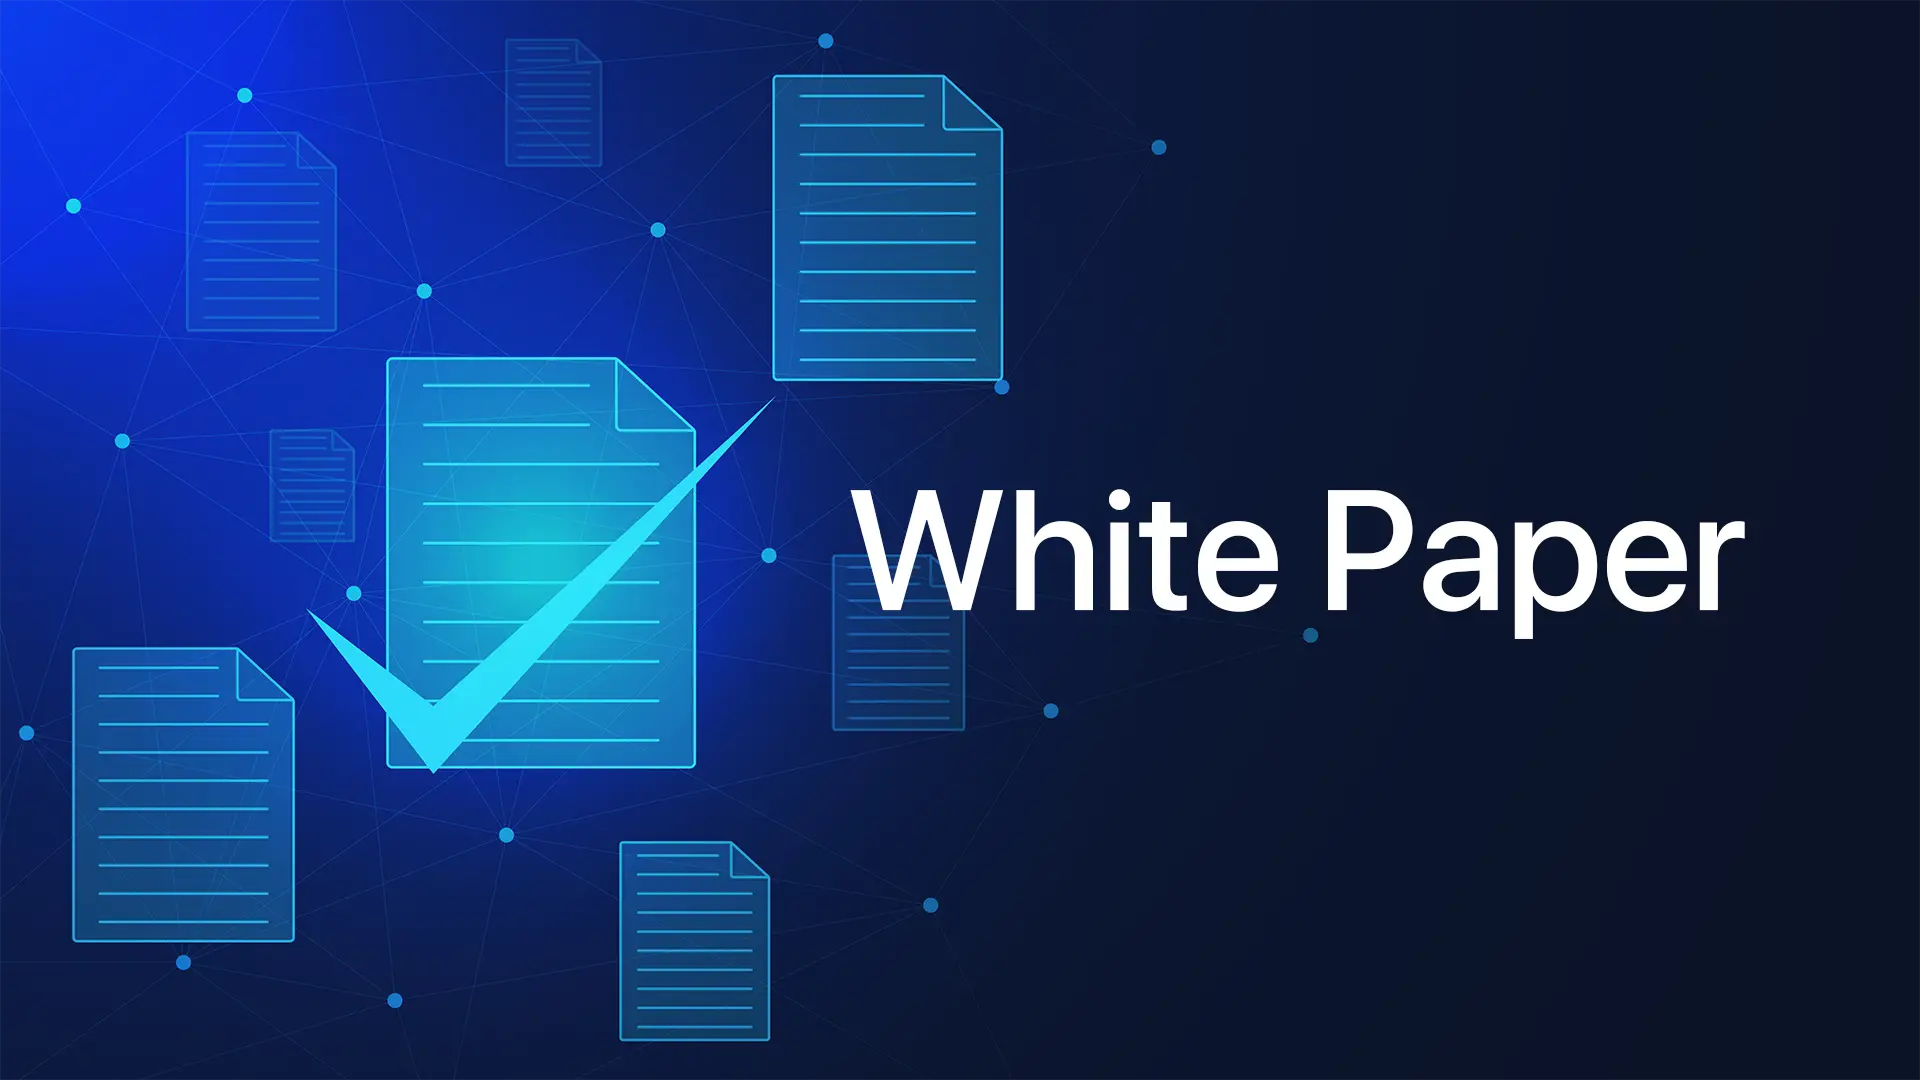 White Paper featured image